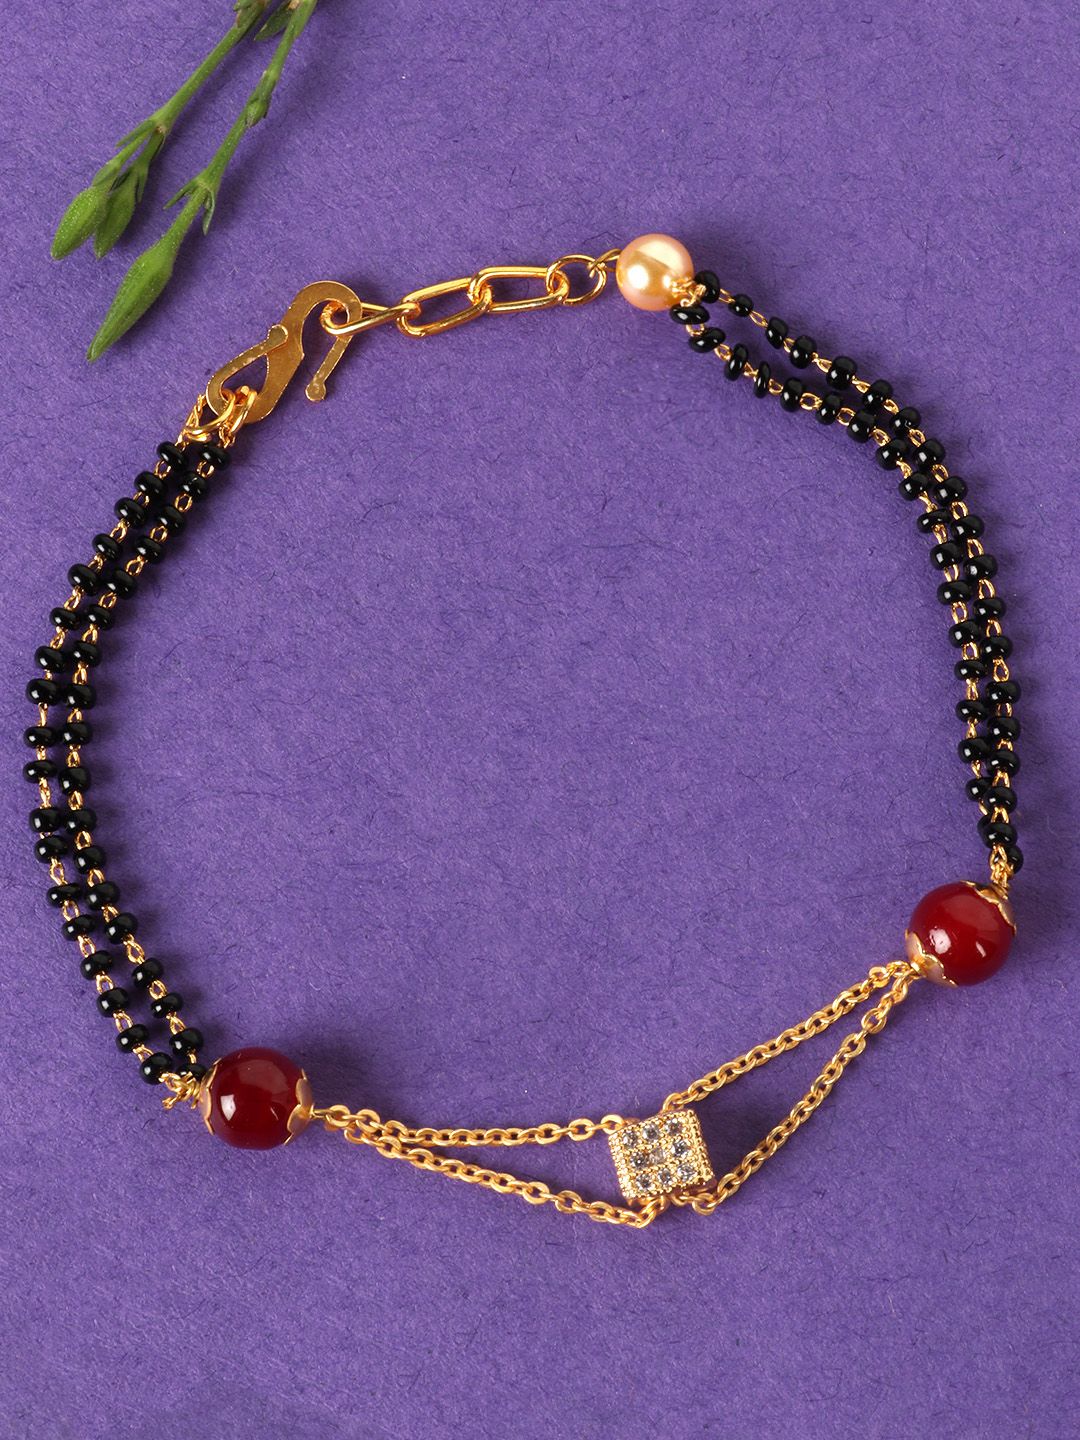 JEWELS GEHNA Black & Red Gold-Plated AD-Studded & Beaded Mangalsutra Bracelet Price in India